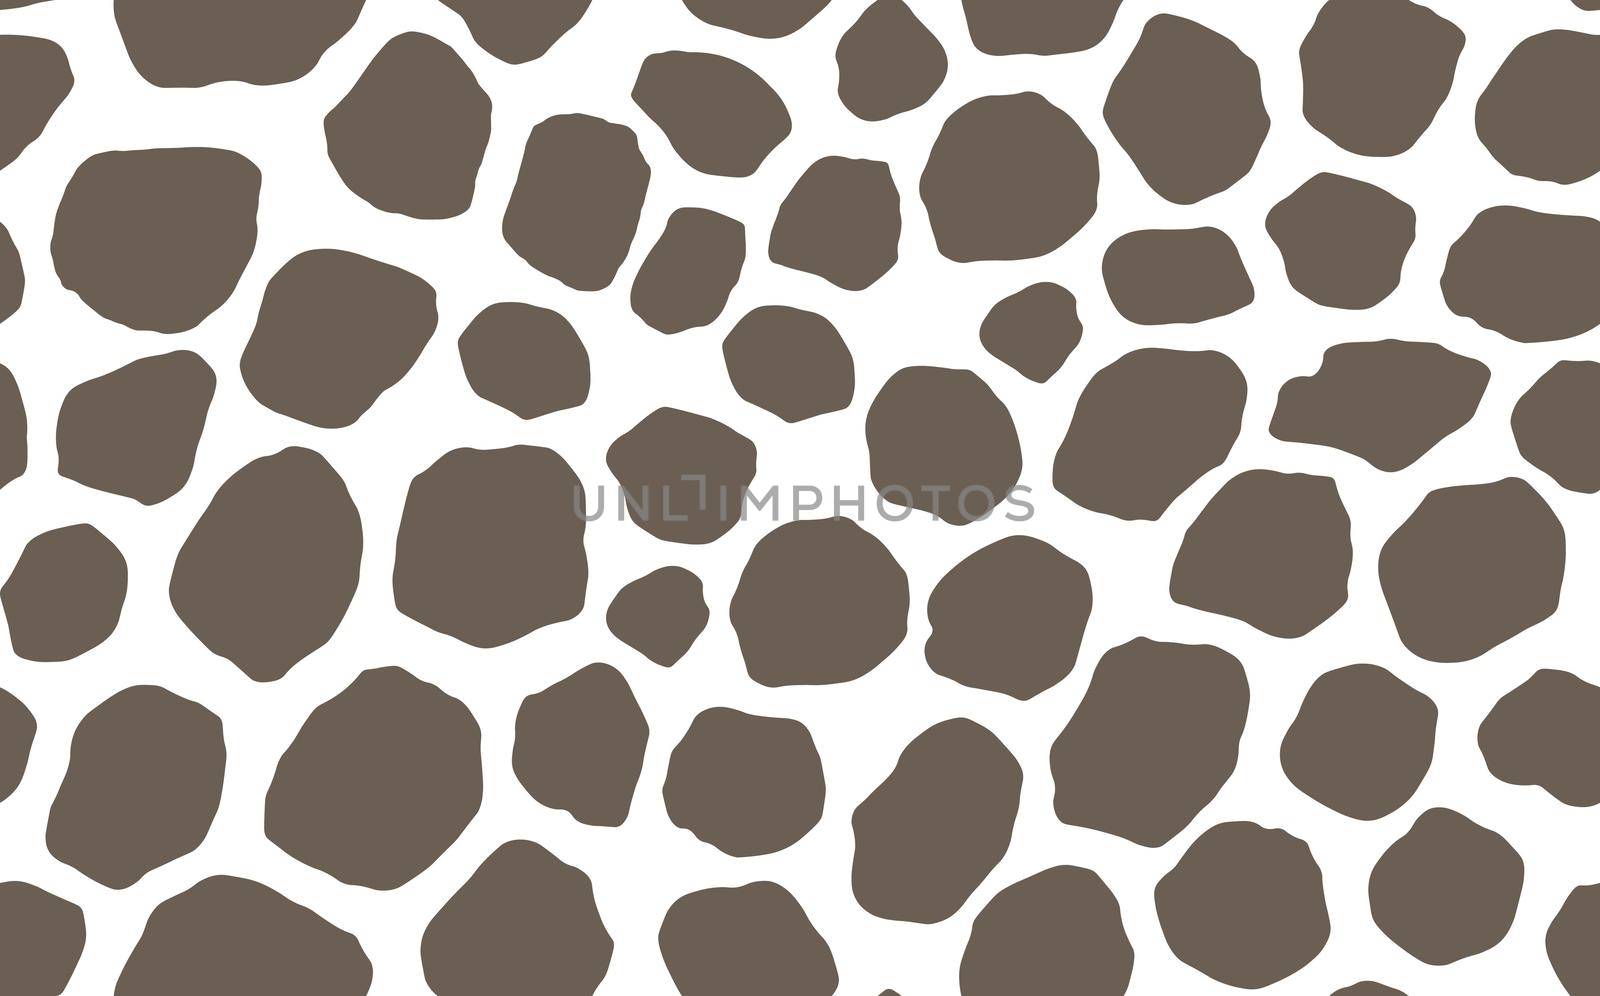 Abstract modern giraffe seamless pattern. Animals trendy background. Colorful decorative vector stock illustration for print, card, postcard, fabric, textile. Modern ornament of stylized skin.